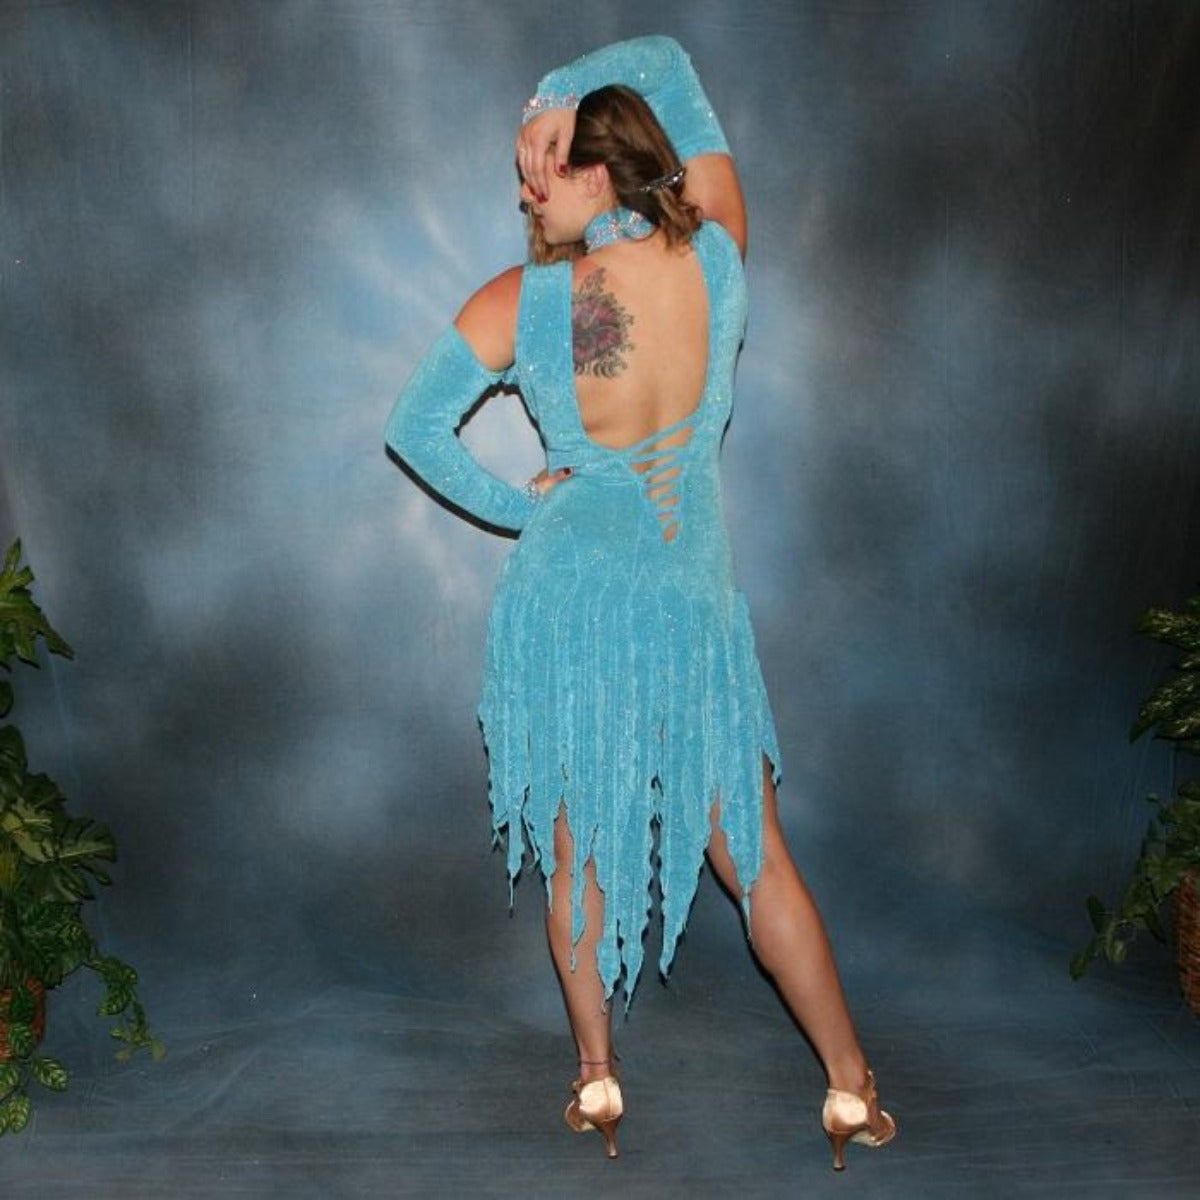 Crystal's Creations back view of Turquoise Latin/rhythm dress was created in turquoise slinky glitterknit, has interesting strap detailing on the back, embellished with CAB Swarovski rhinestone  work on the neck piece, & includes wrist bands or gauntlets with Swarovski rhinestone work.